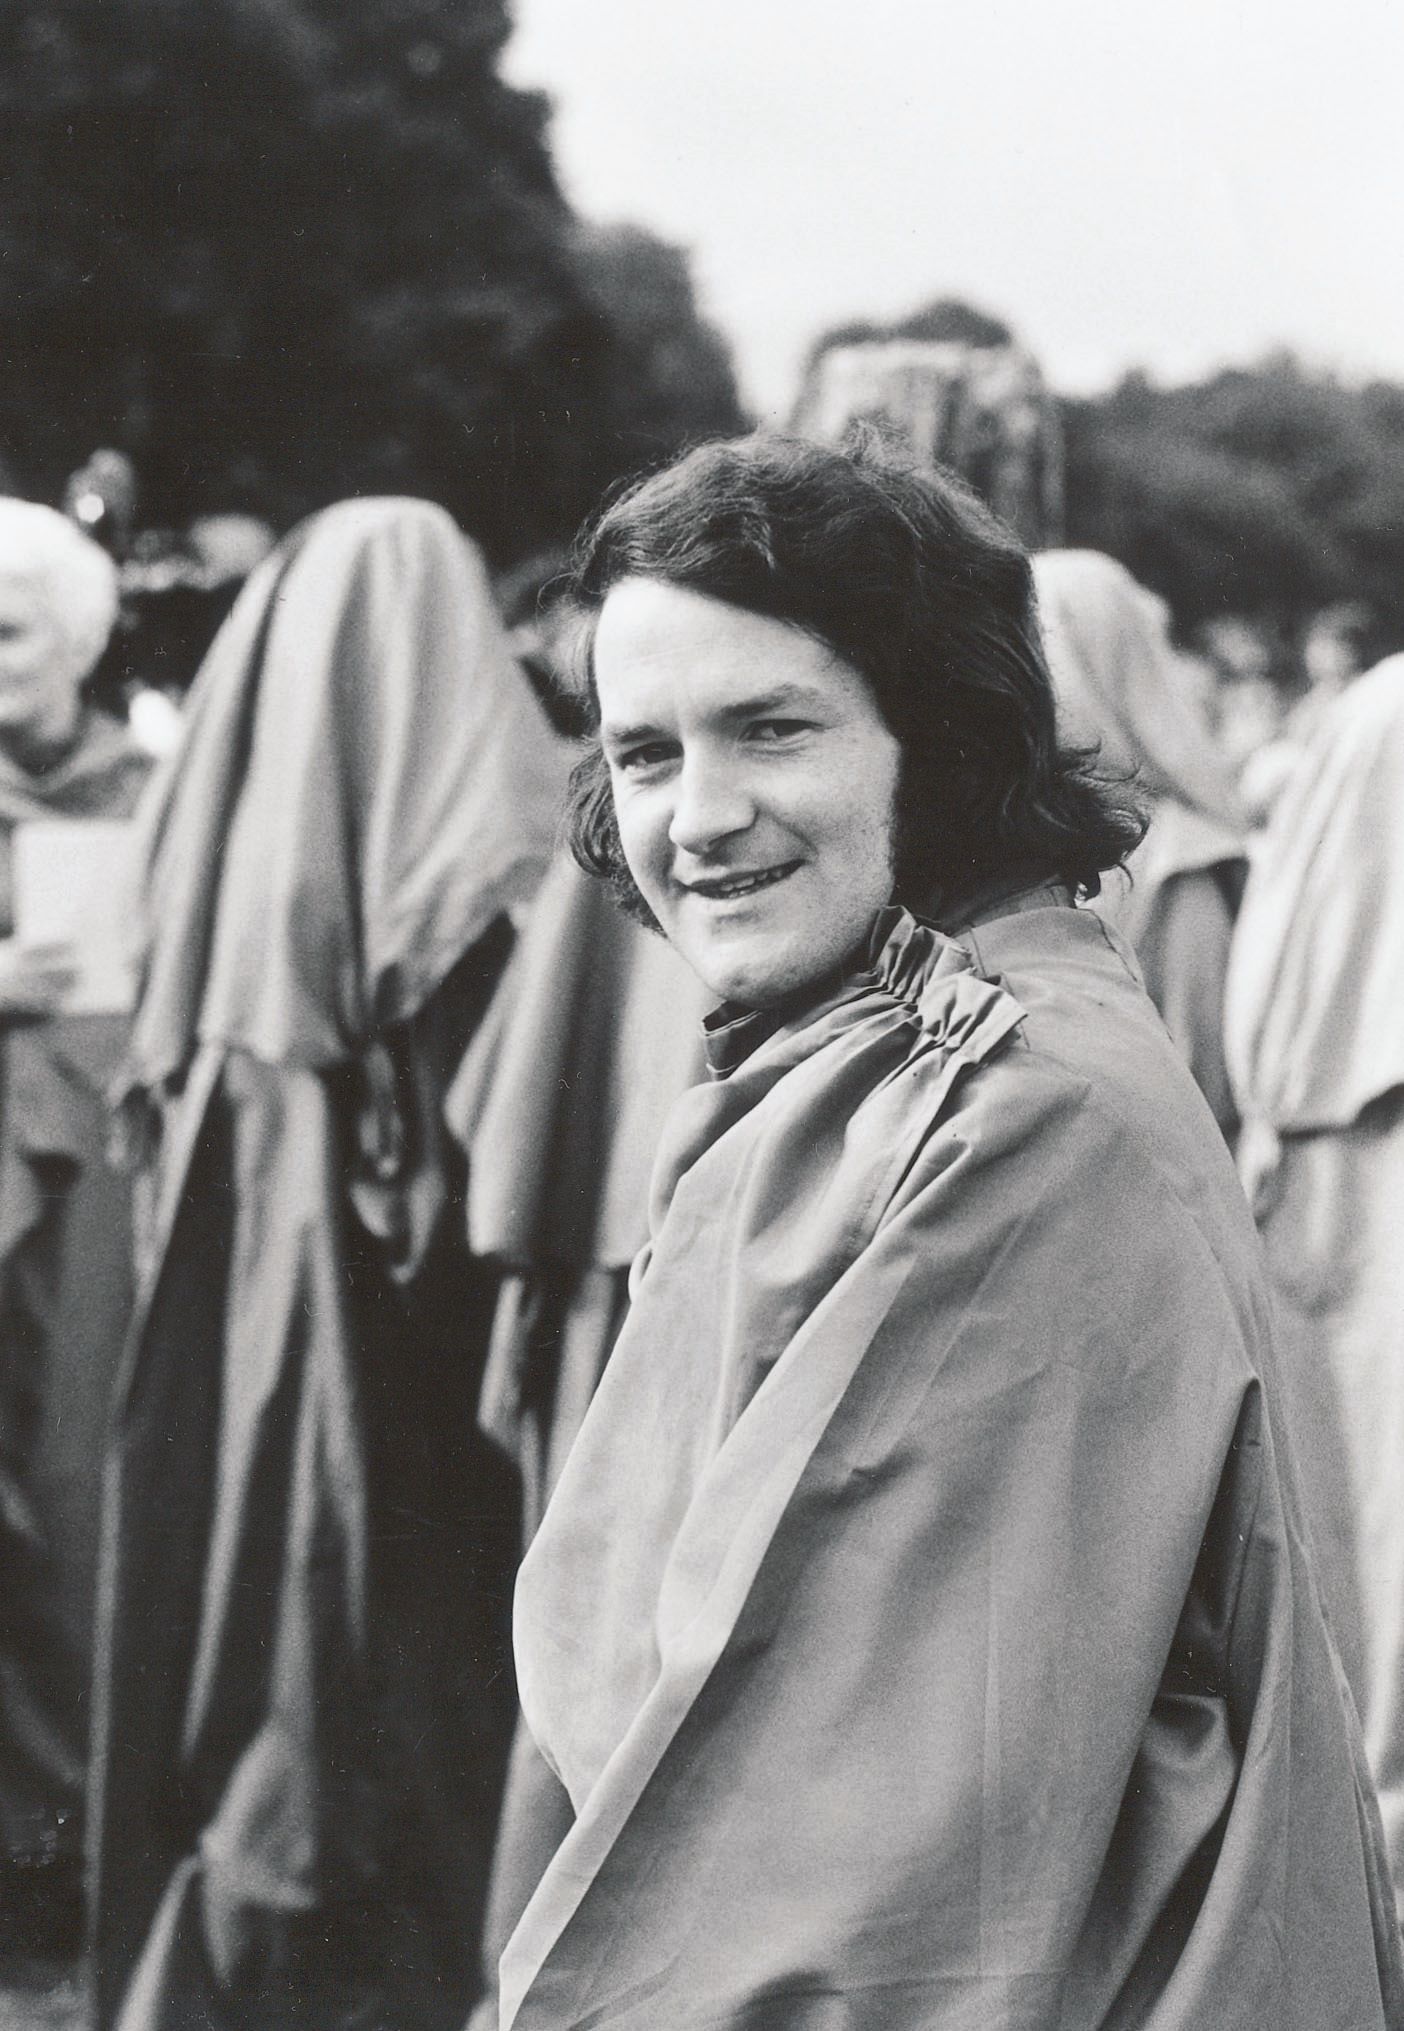 About to join the Gorsedd of Bards at the Bangor National Eisteddfod in 1971.c with permission of the National Library of Wales